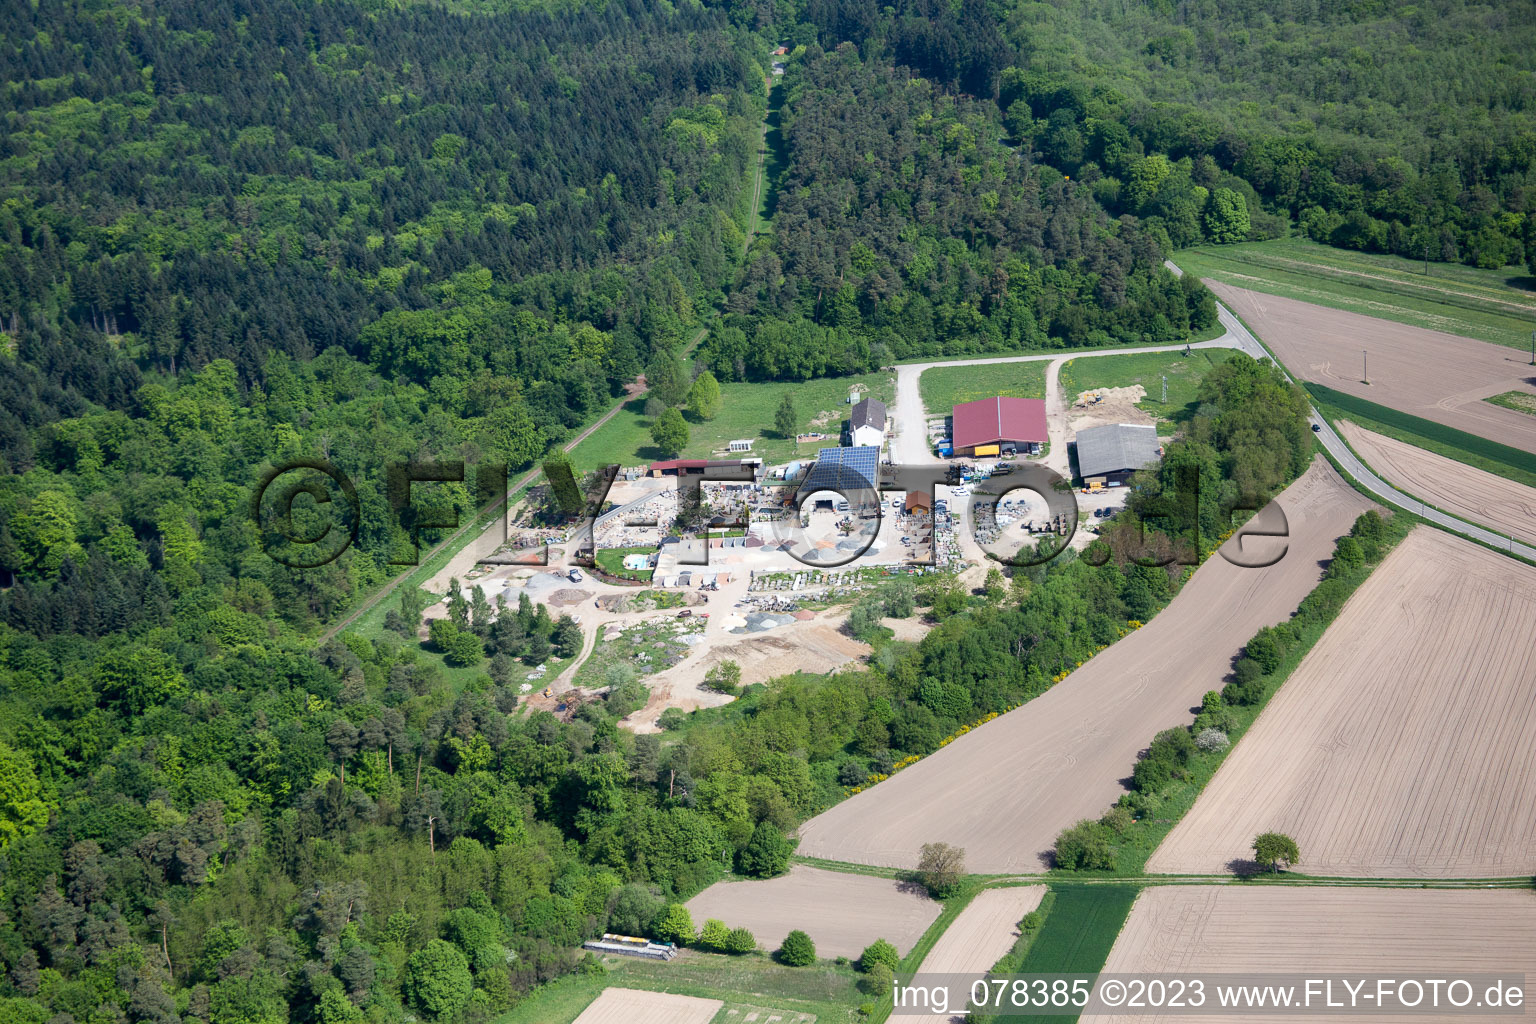 Palatinum landscape and garden design in Hagenbach in the state Rhineland-Palatinate, Germany seen from above